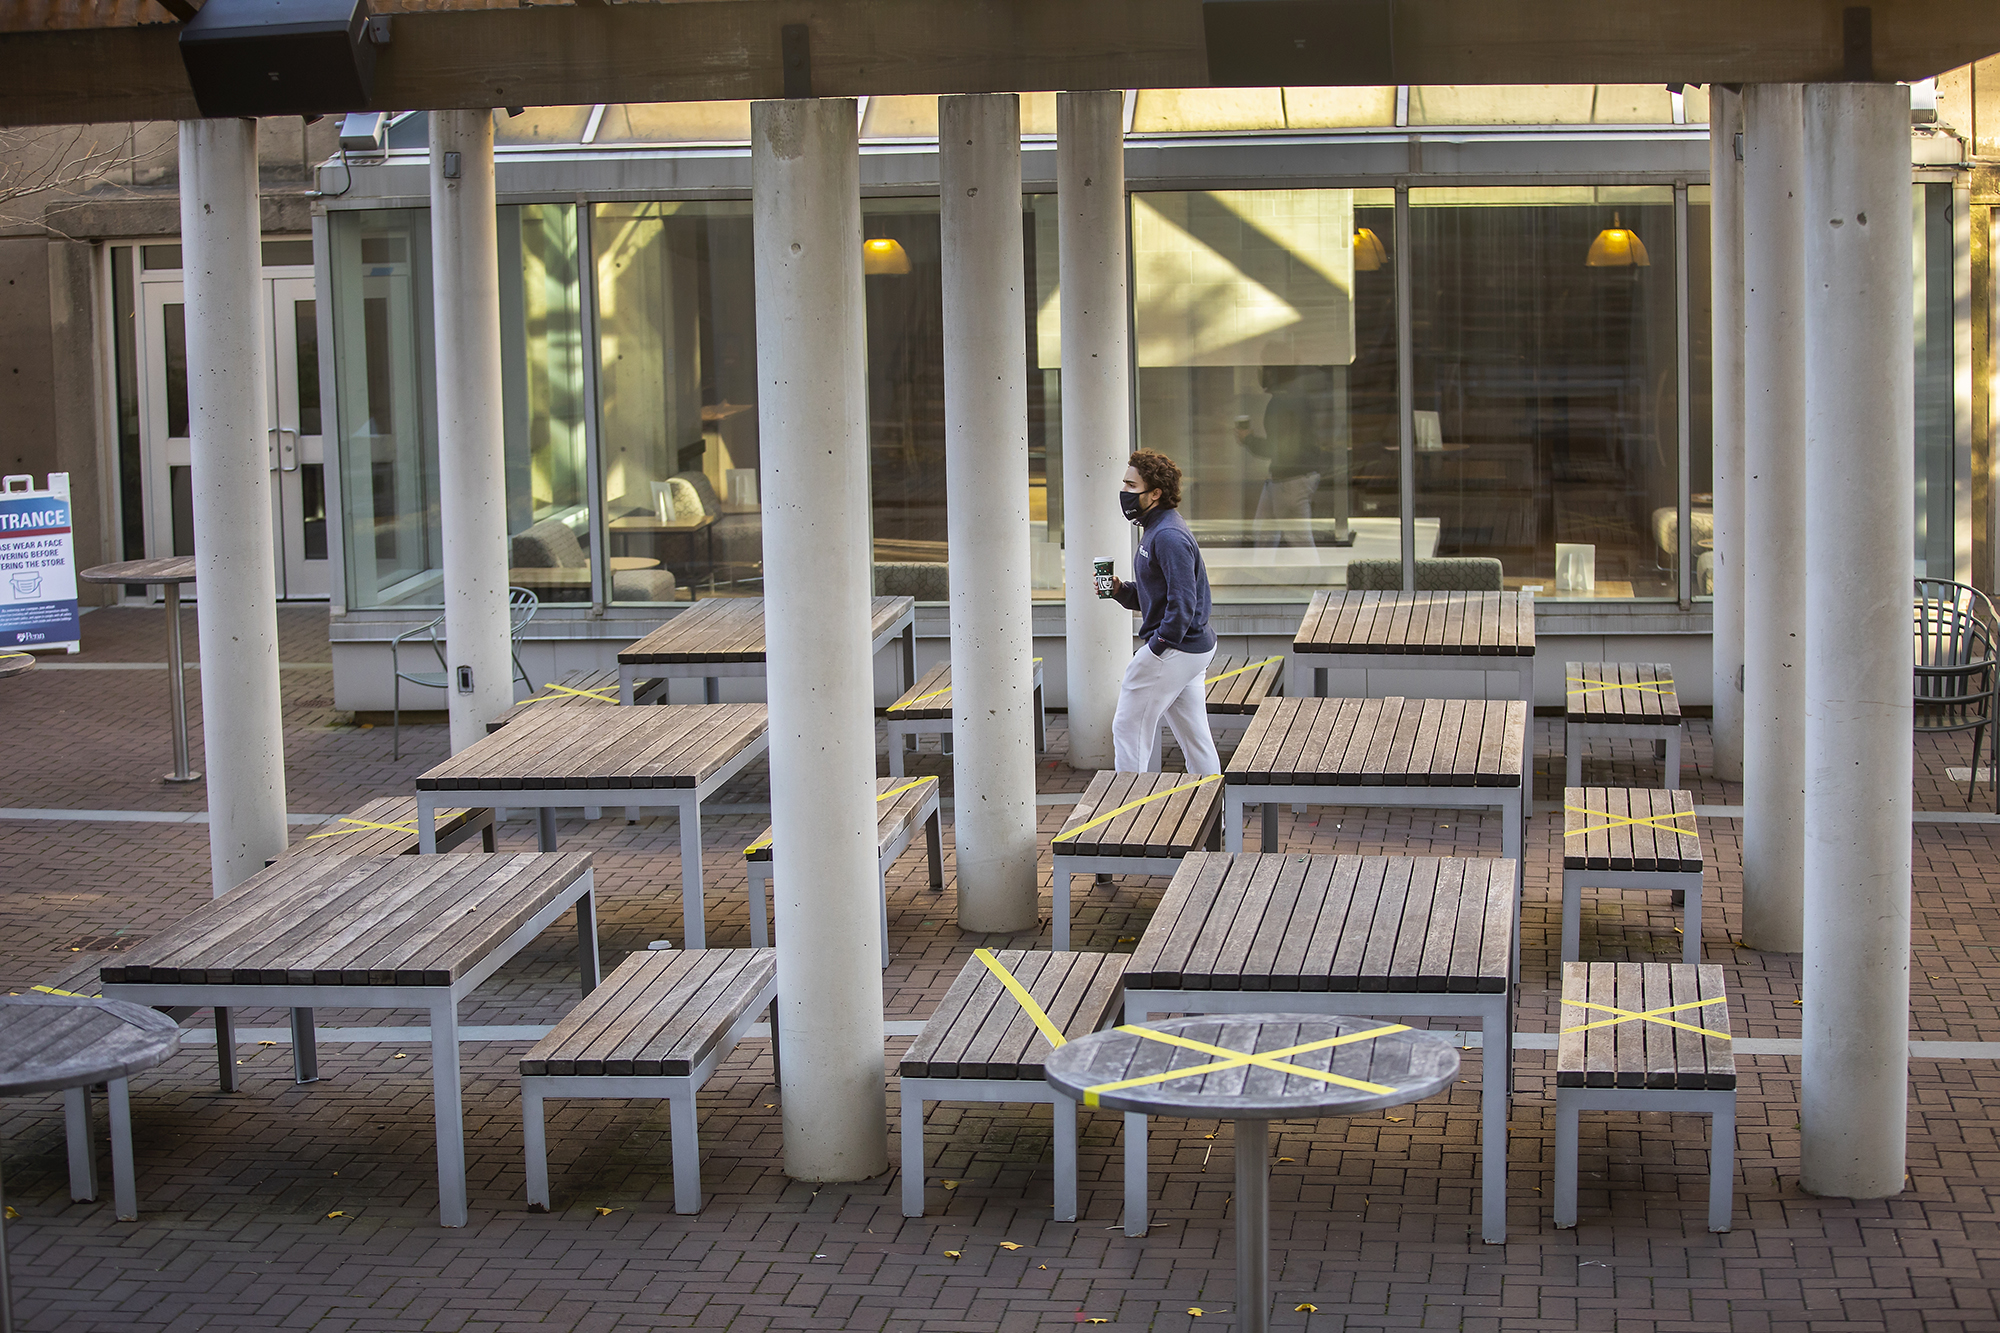 Empty tables at an outdoor dining area, some marked off from use for social distancing, with a student walking past wearing a mask